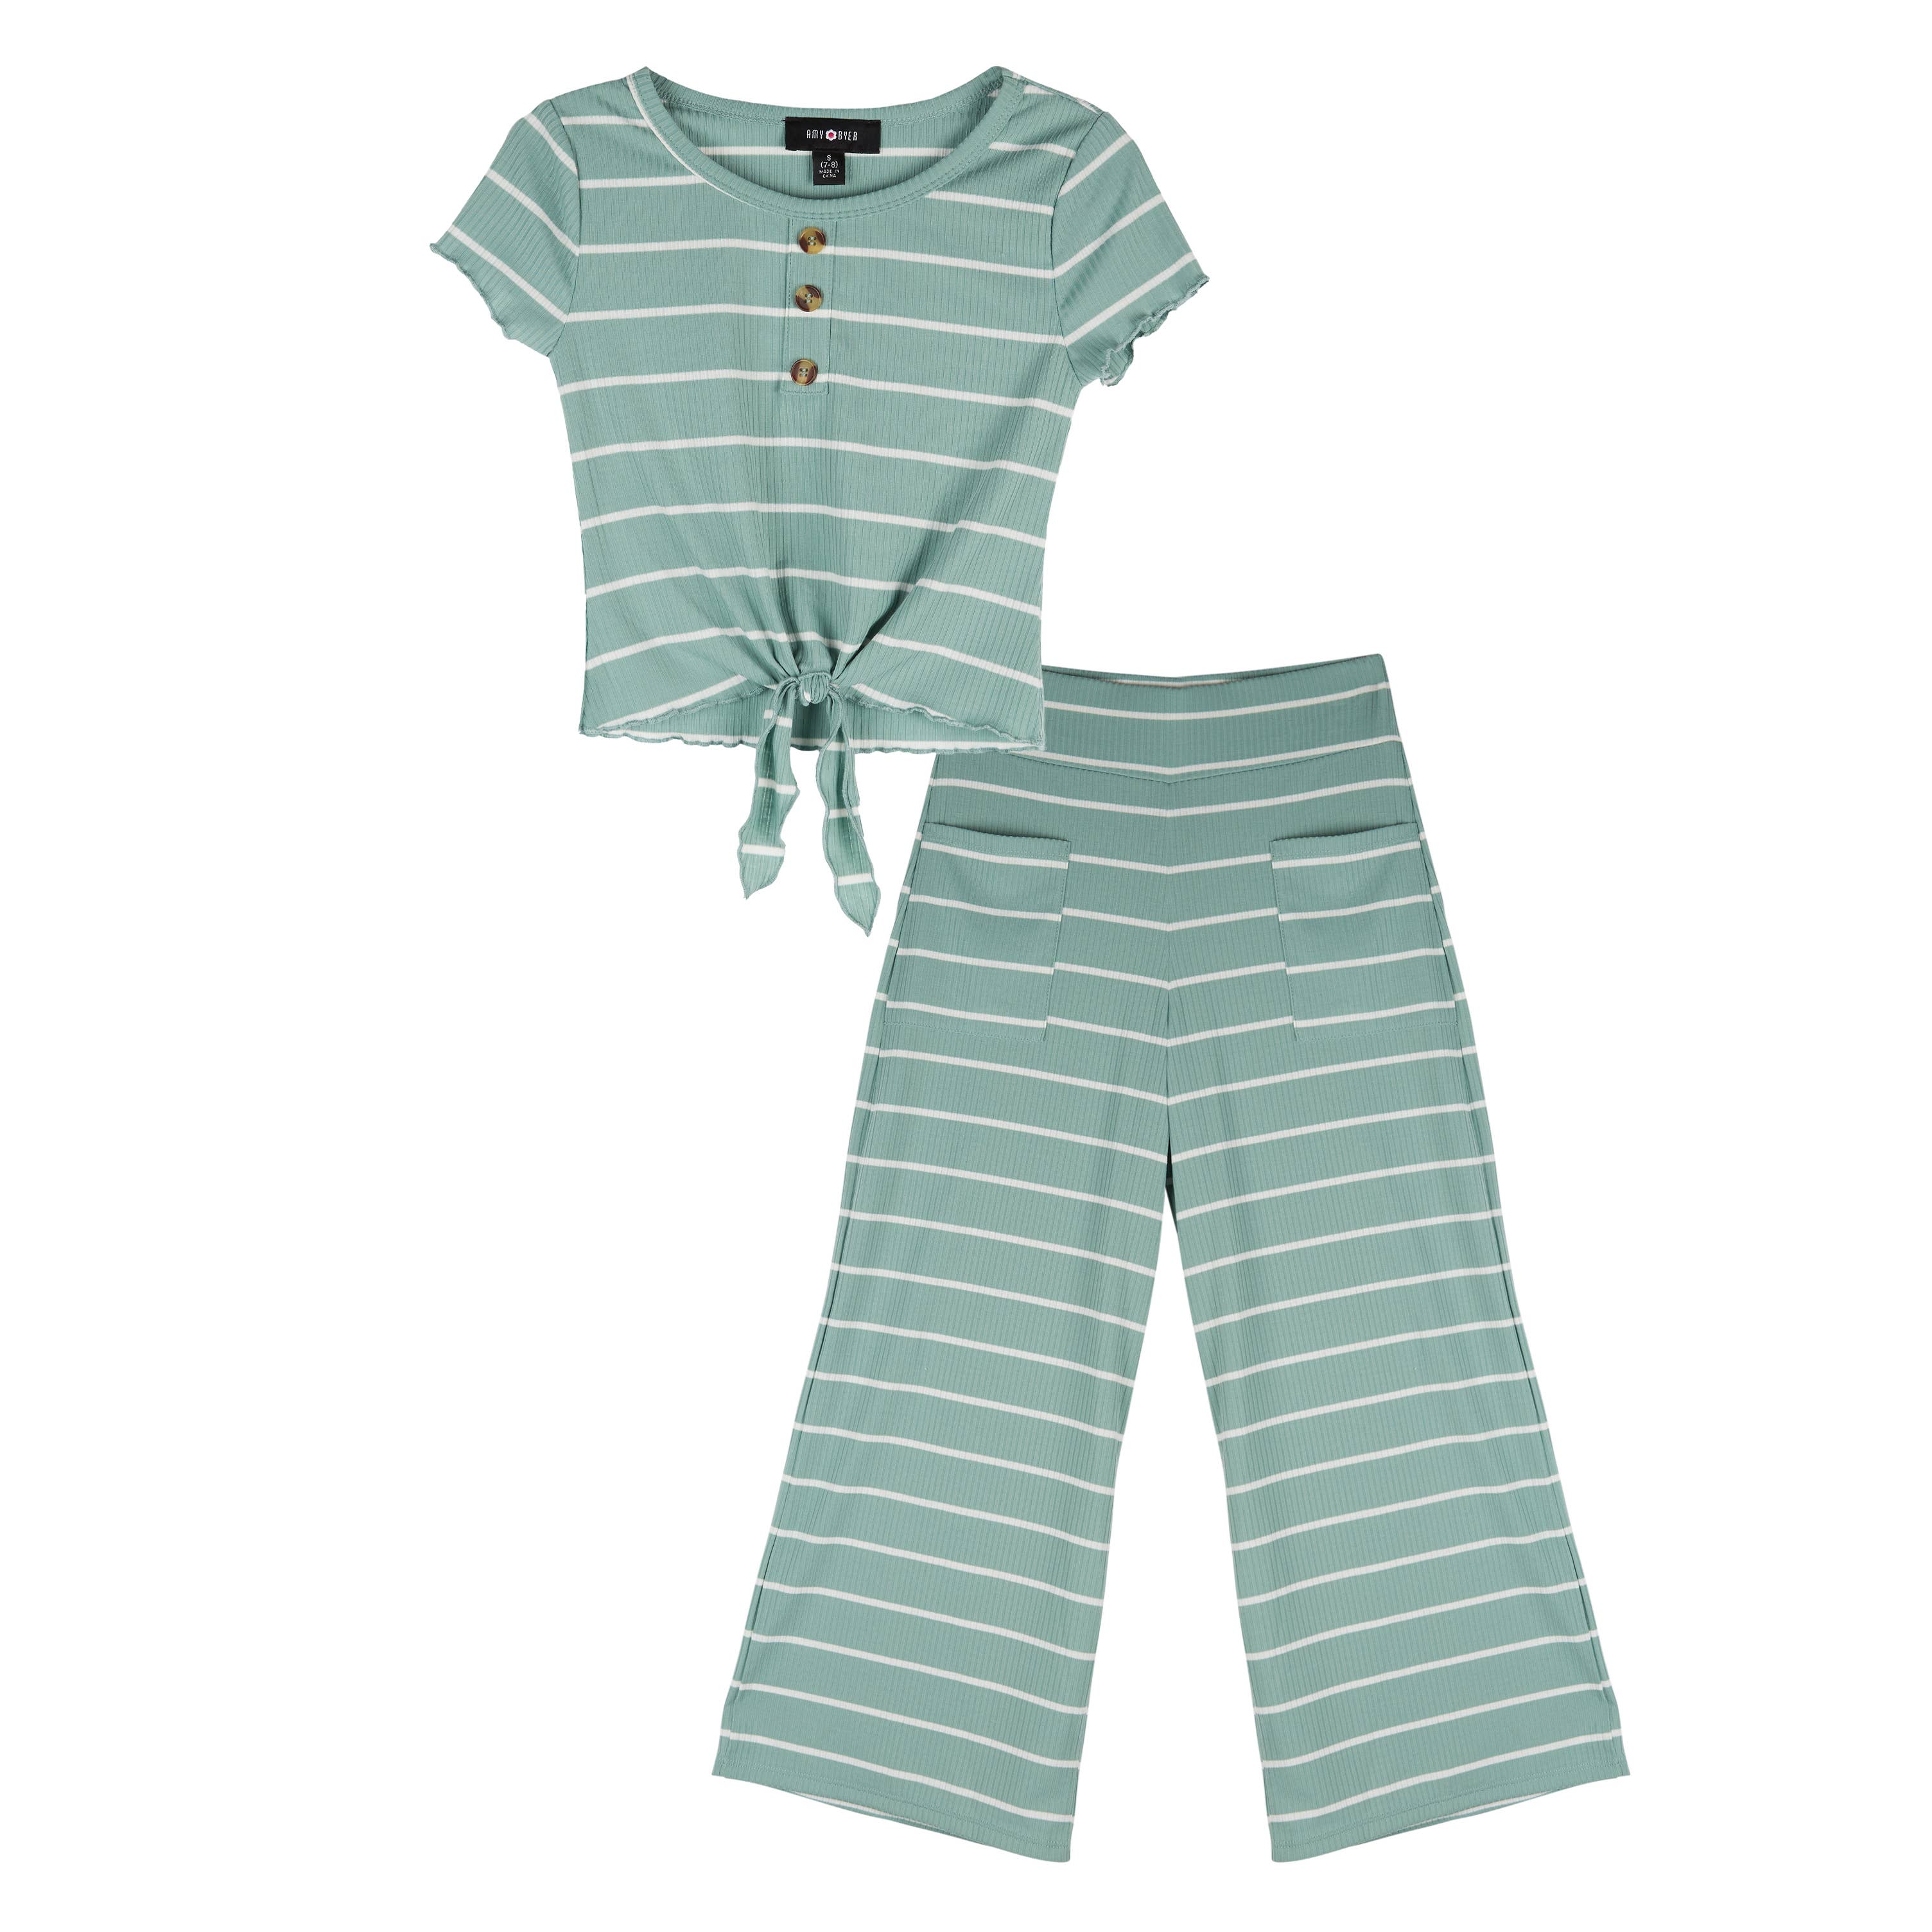 Commons Girls Short Sleeve Stripped Top & Gaucho Pant Set